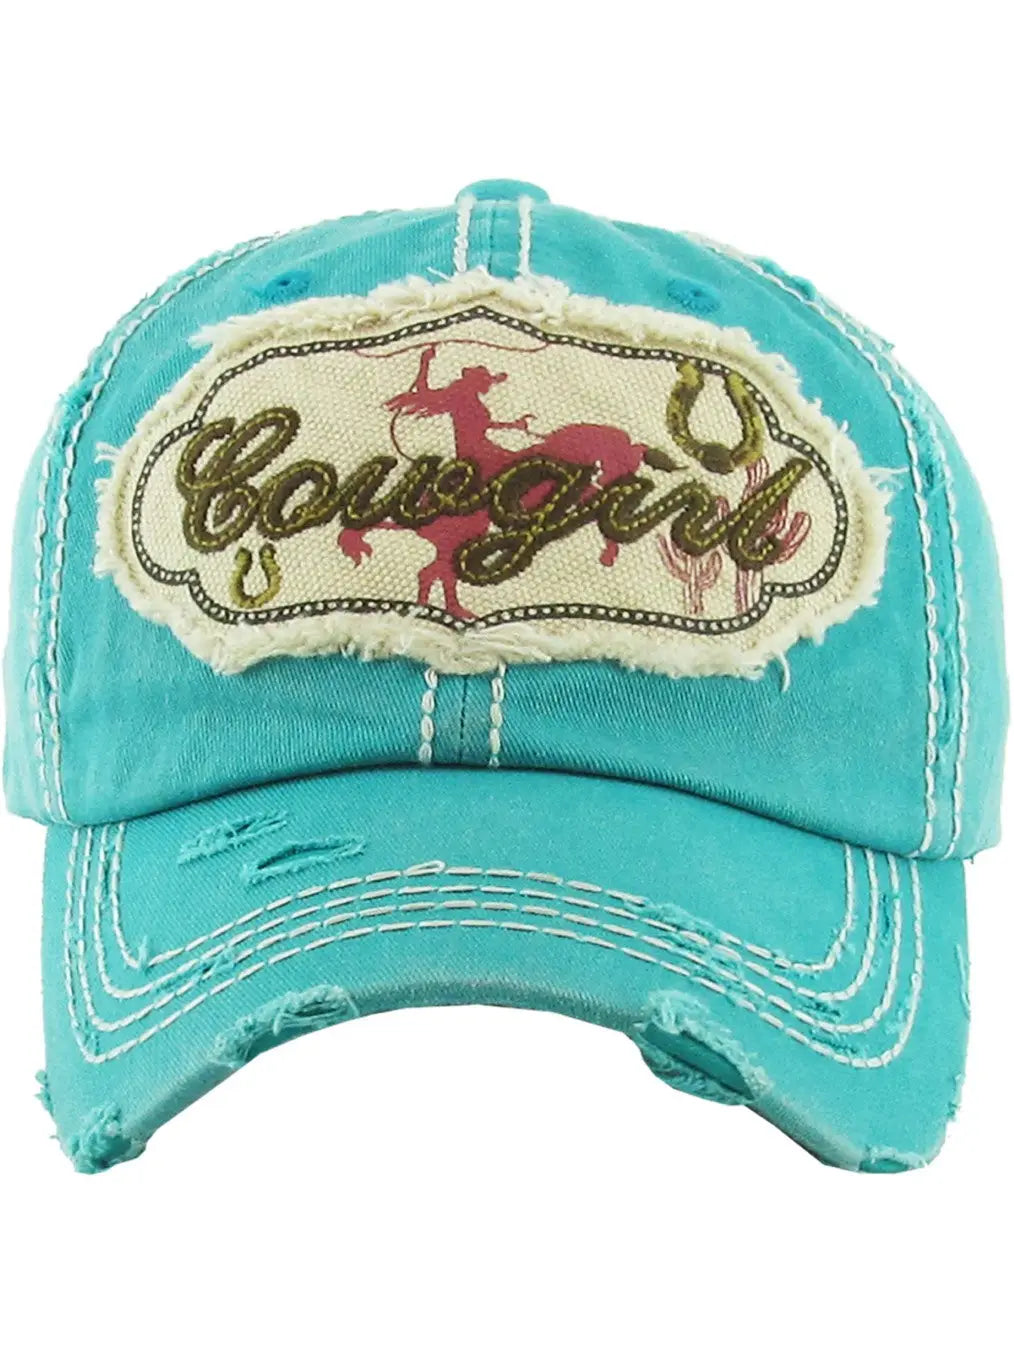 AWST Cowgirl Turquoise Washed Vintage Hat Boca Delray